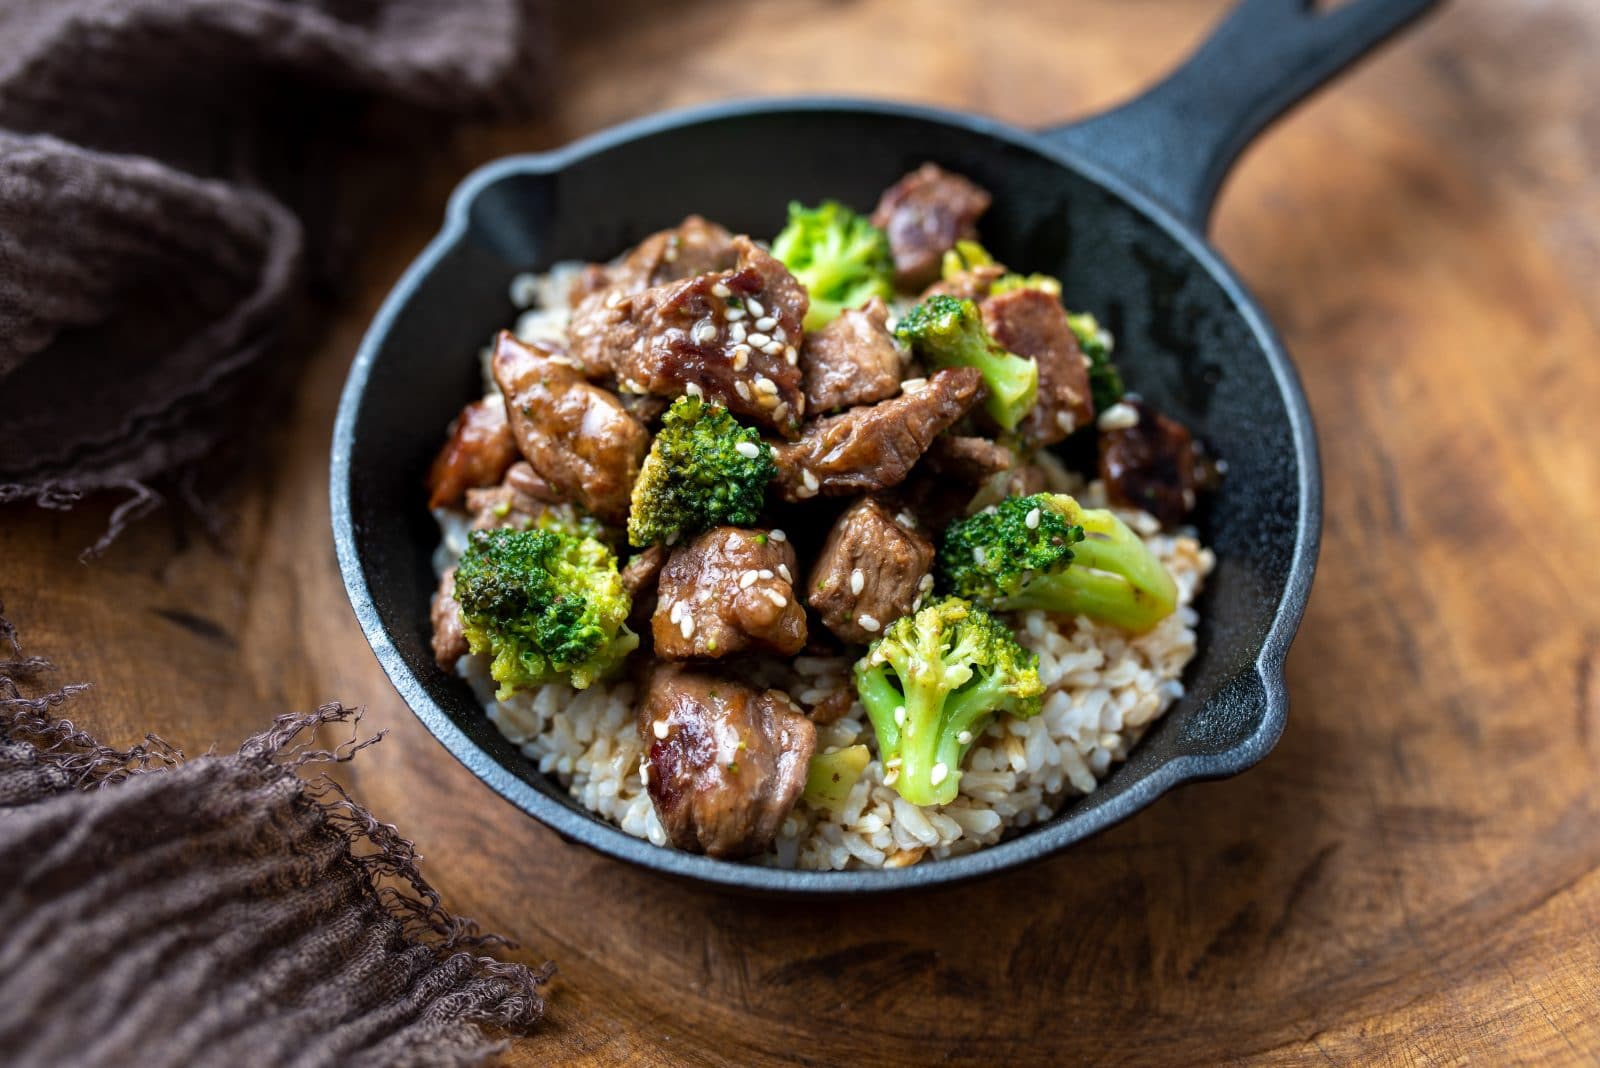 Beef and broccoli with white rice